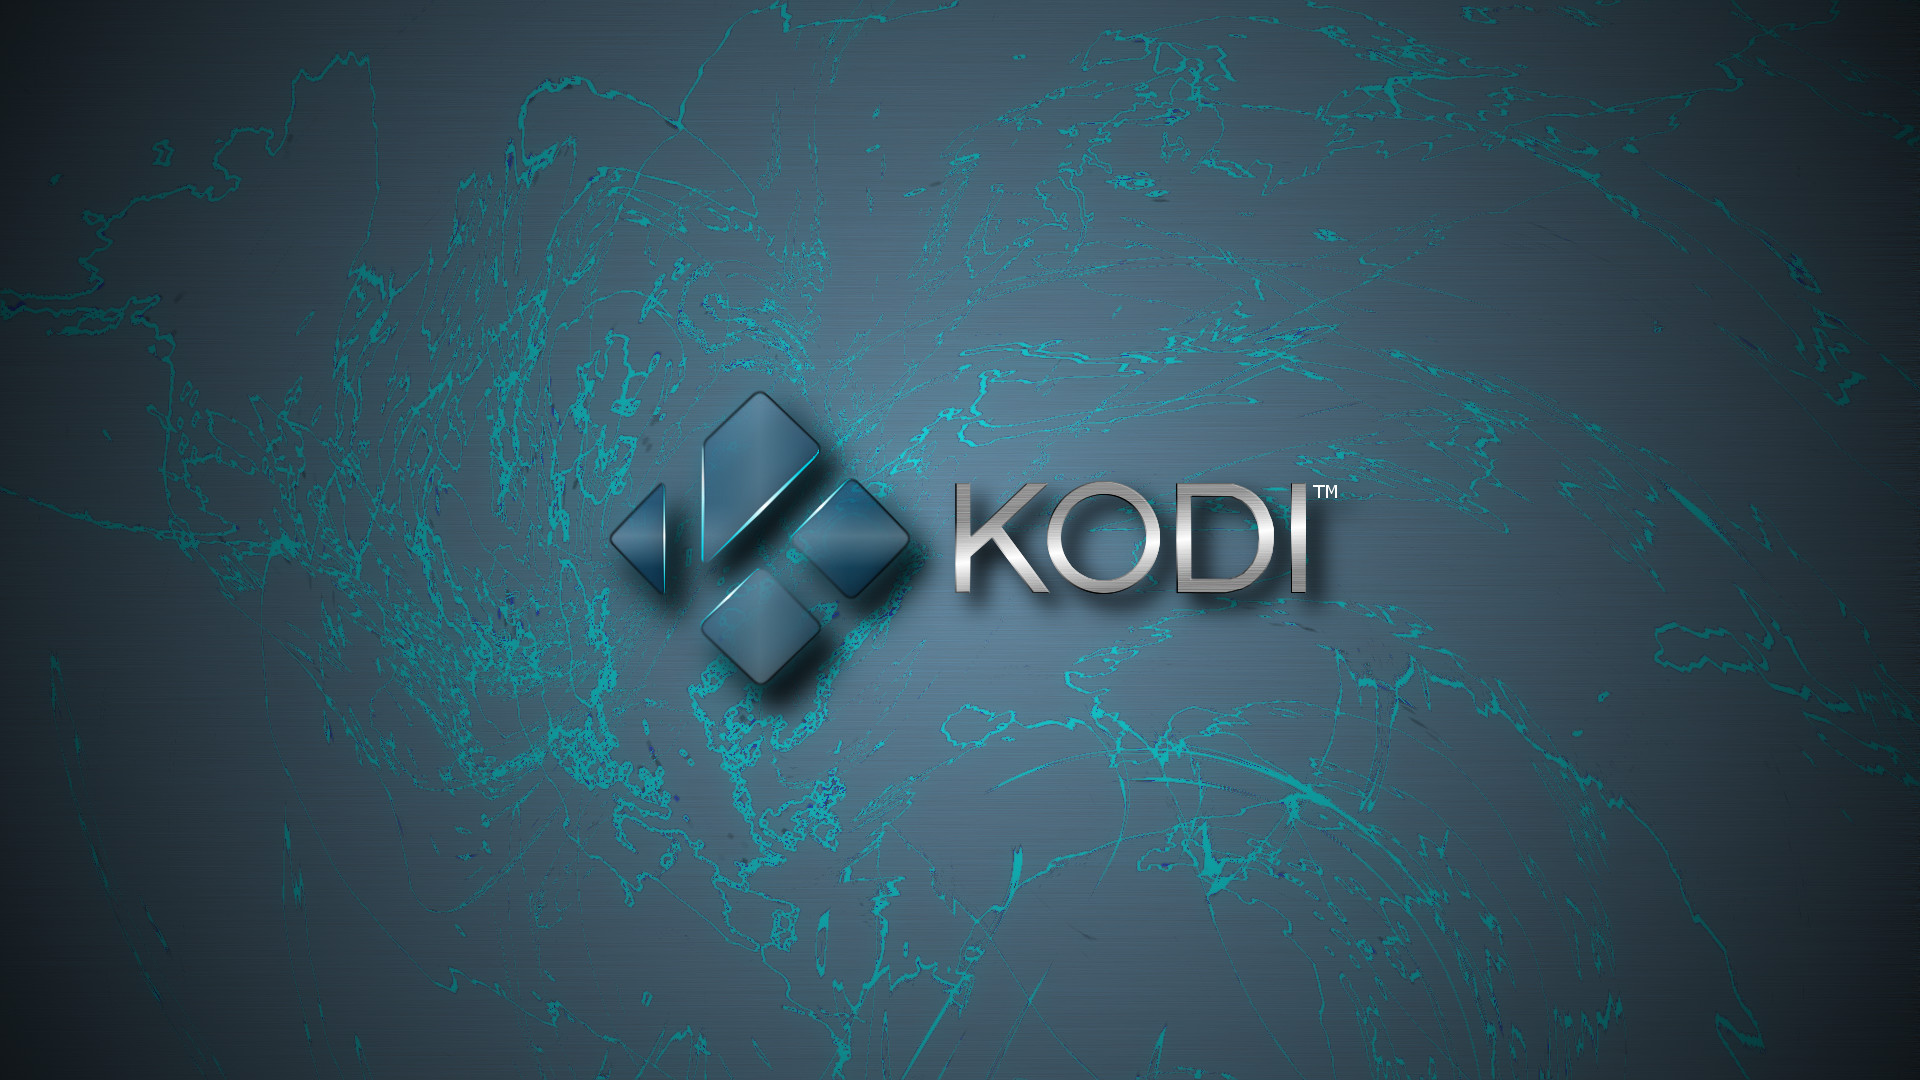 1920x1080 can provide you to HD WallpapersGet Gorgeous Hd Wallpapers Kodi 